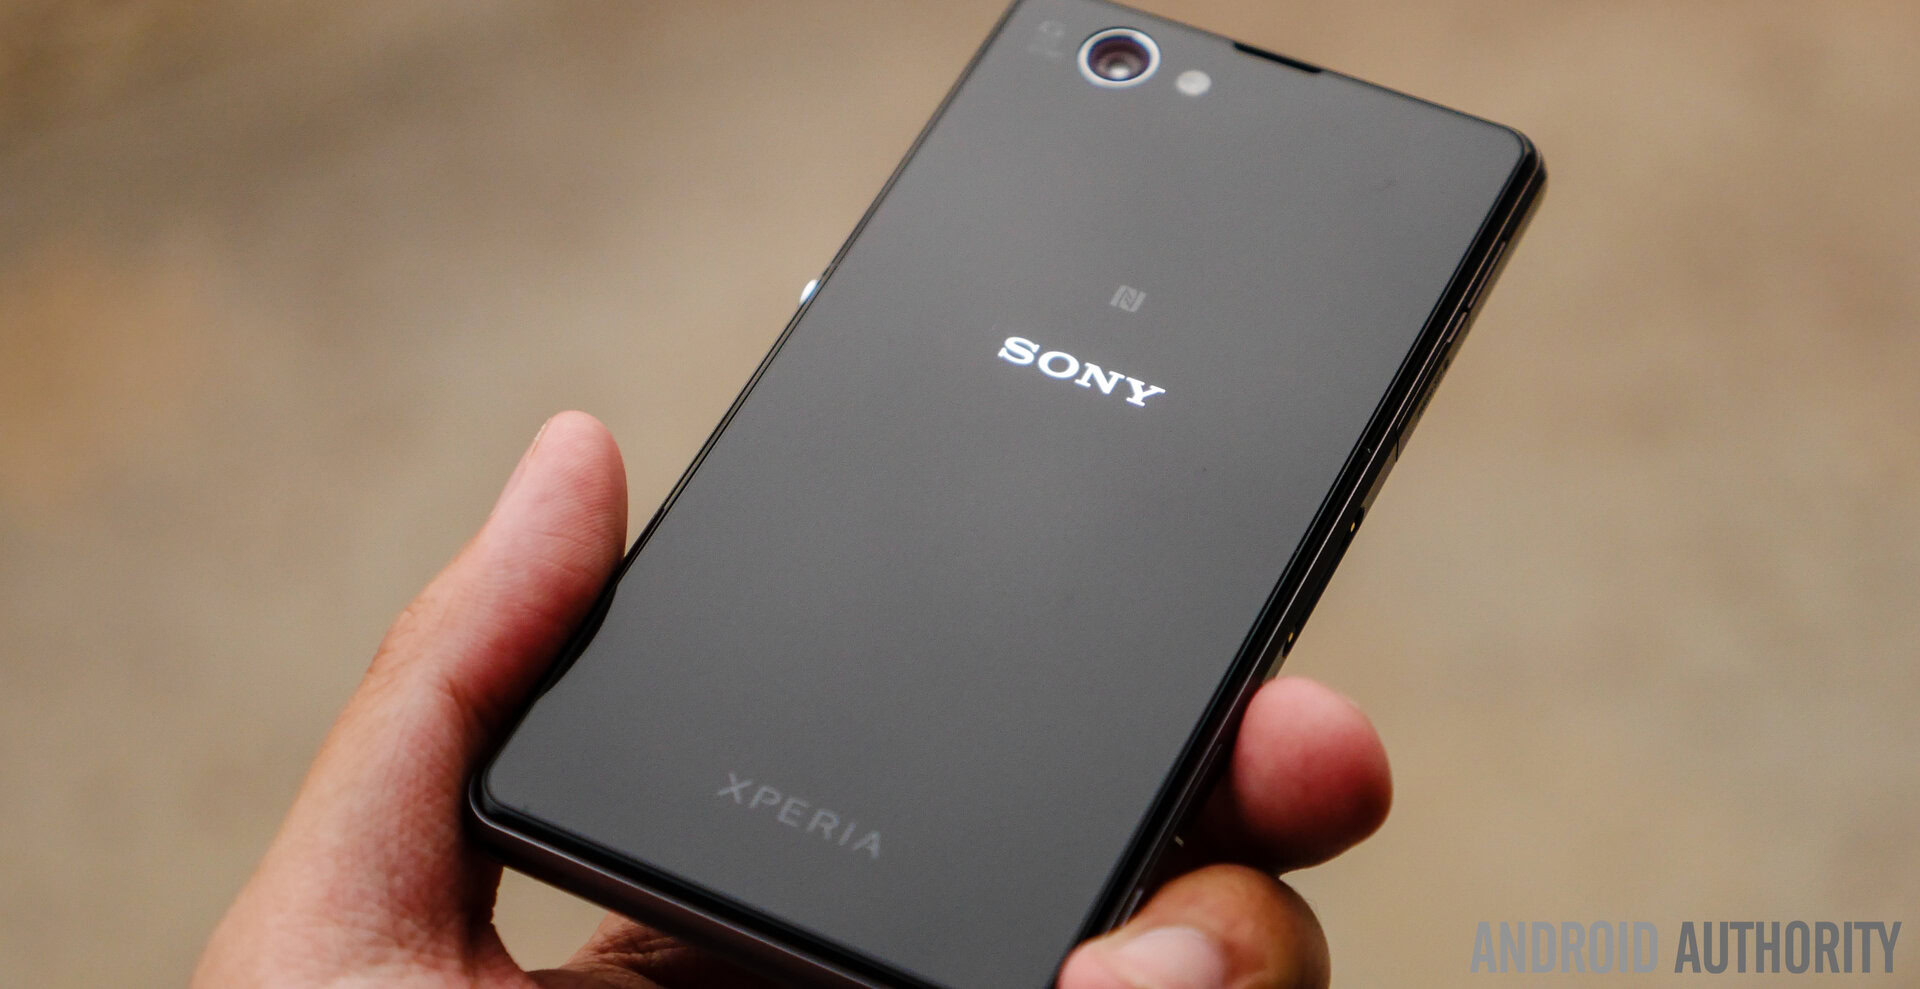 Sony Xperia Z1 unboxing and first impressions